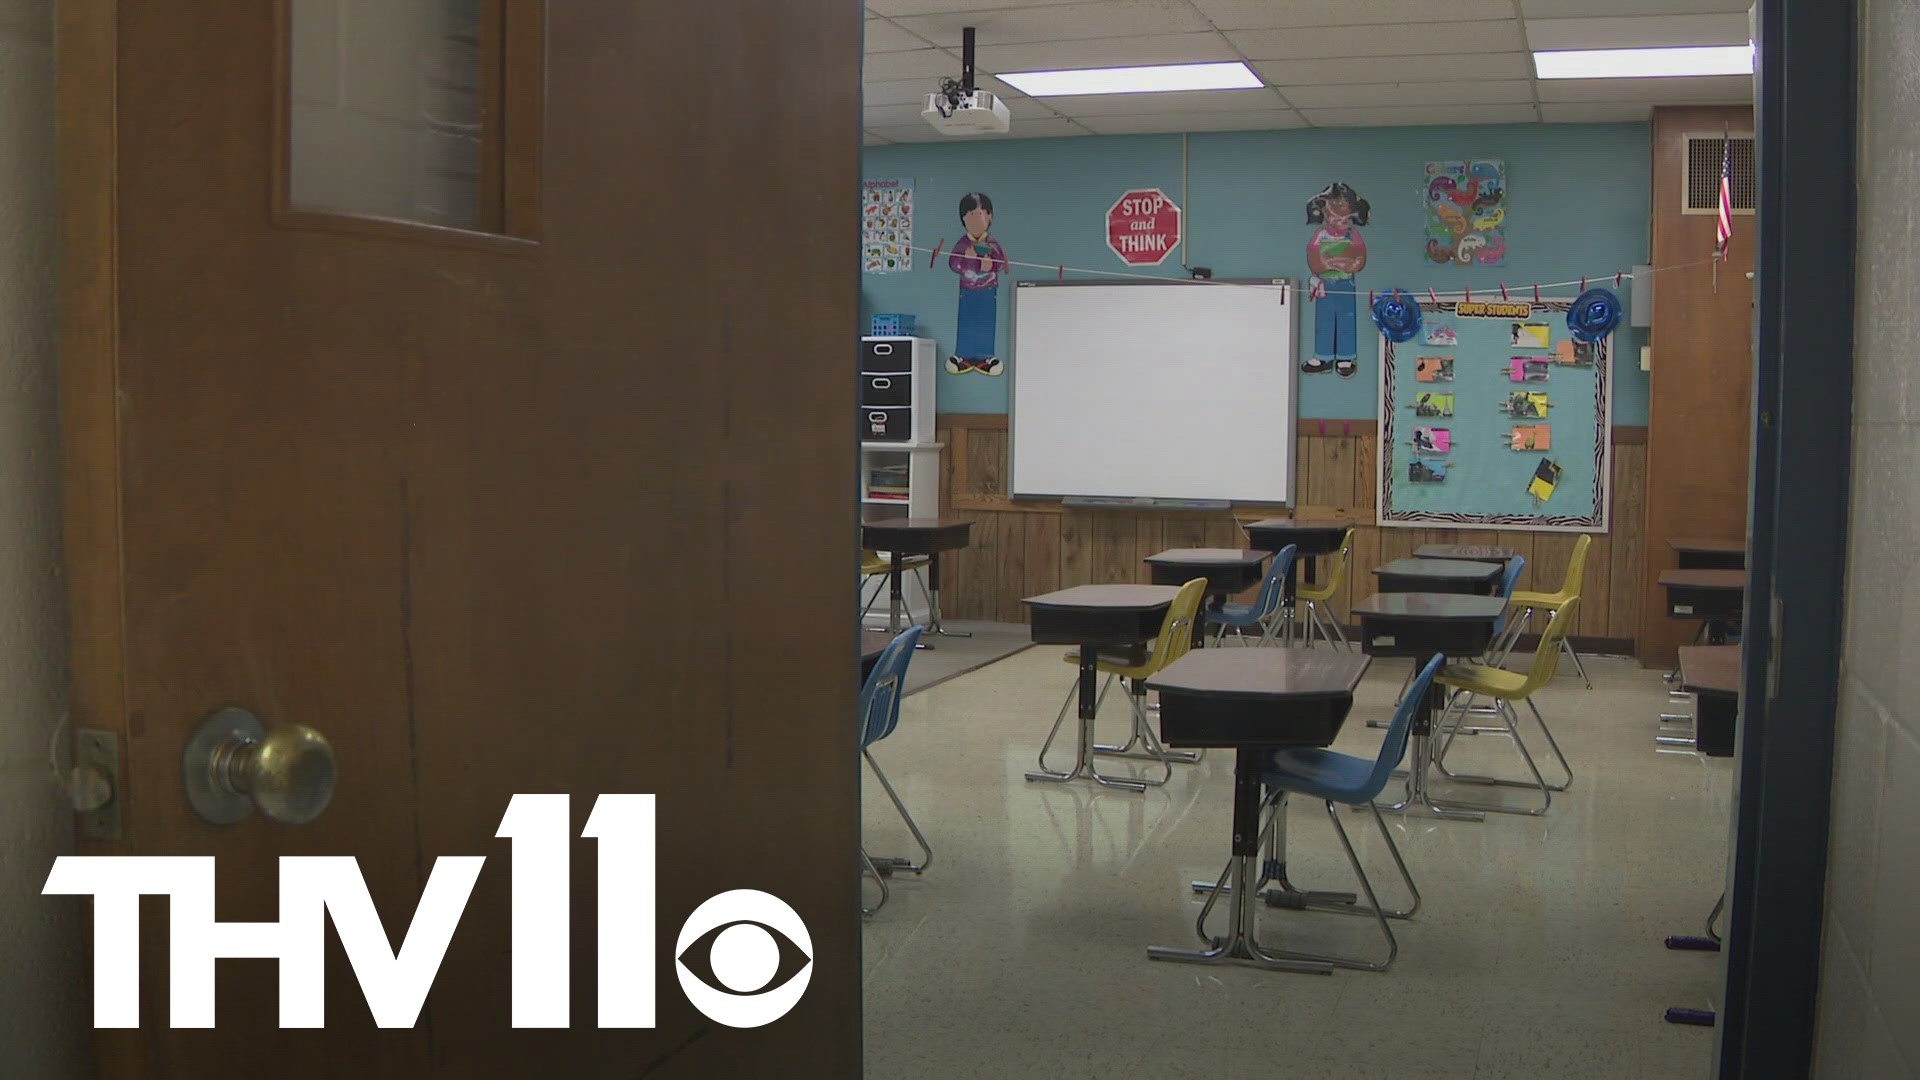 In August, several new laws that will impact Arkansas schools were enacted. Here's what to know.